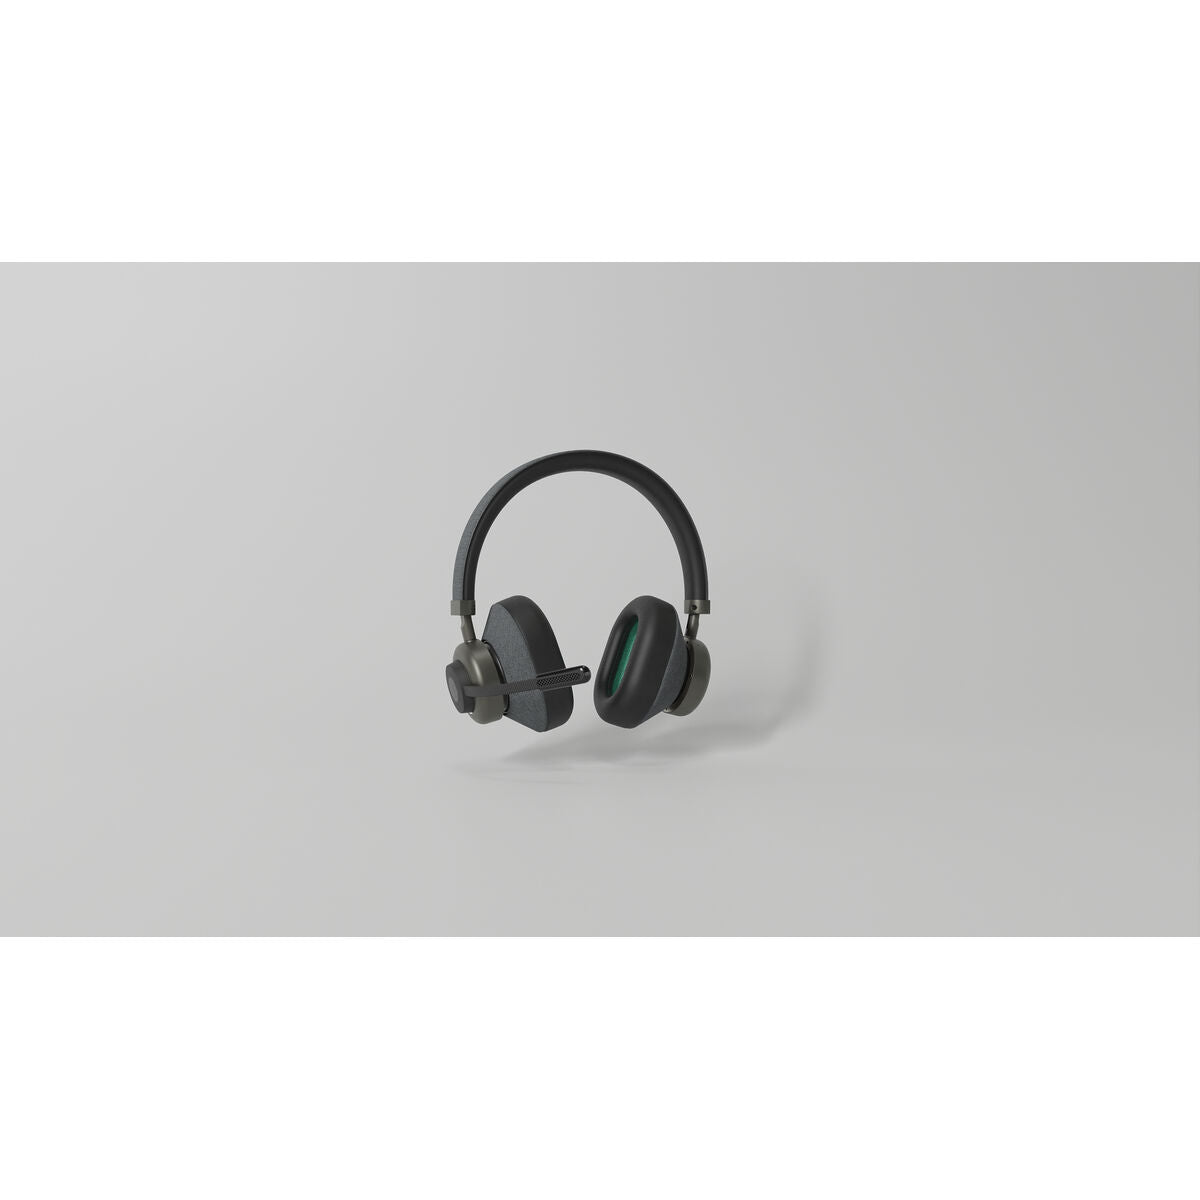 Headphones TPROPLUS-C Black Grey, N/A, Electronics, Mobile communication and accessories, headphones-tproplus-c-black-grey, :Wireless Headphones, Brand_N/A, category-reference-2609, category-reference-2642, category-reference-2847, category-reference-t-19653, category-reference-t-21312, category-reference-t-25535, category-reference-t-4036, category-reference-t-4037, computers / peripherals, Condition_NEW, entertainment, music, office, Price_300 - 400, telephones & tablets, Teleworking, RiotNook